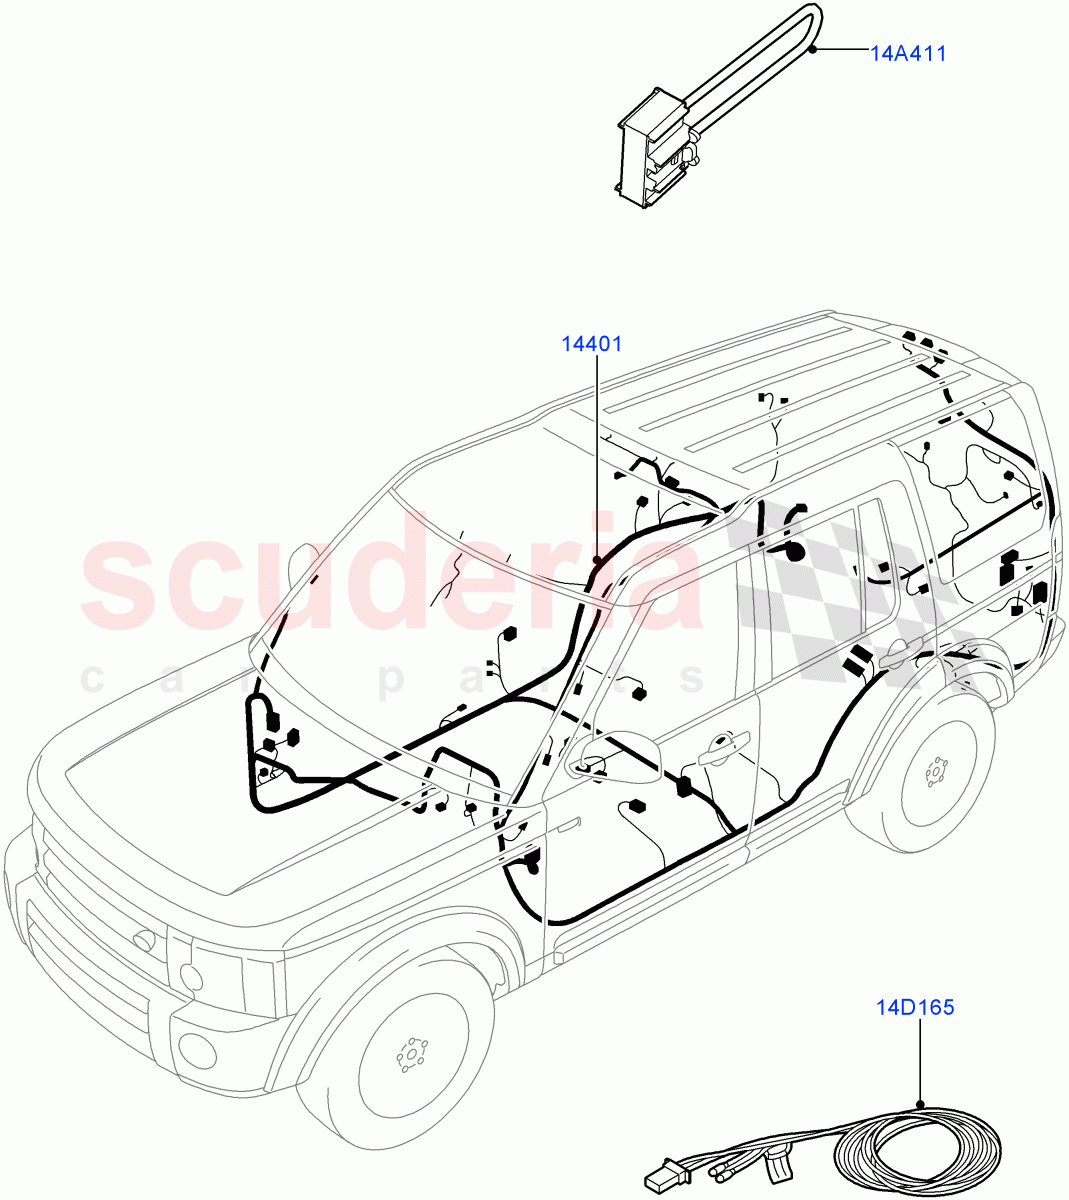 Electrical Wiring - Engine And Dash(Main Harness)((V)FROMBA000001,(V)TOBA999999) of Land Rover Land Rover Discovery 4 (2010-2016) [4.0 Petrol V6]